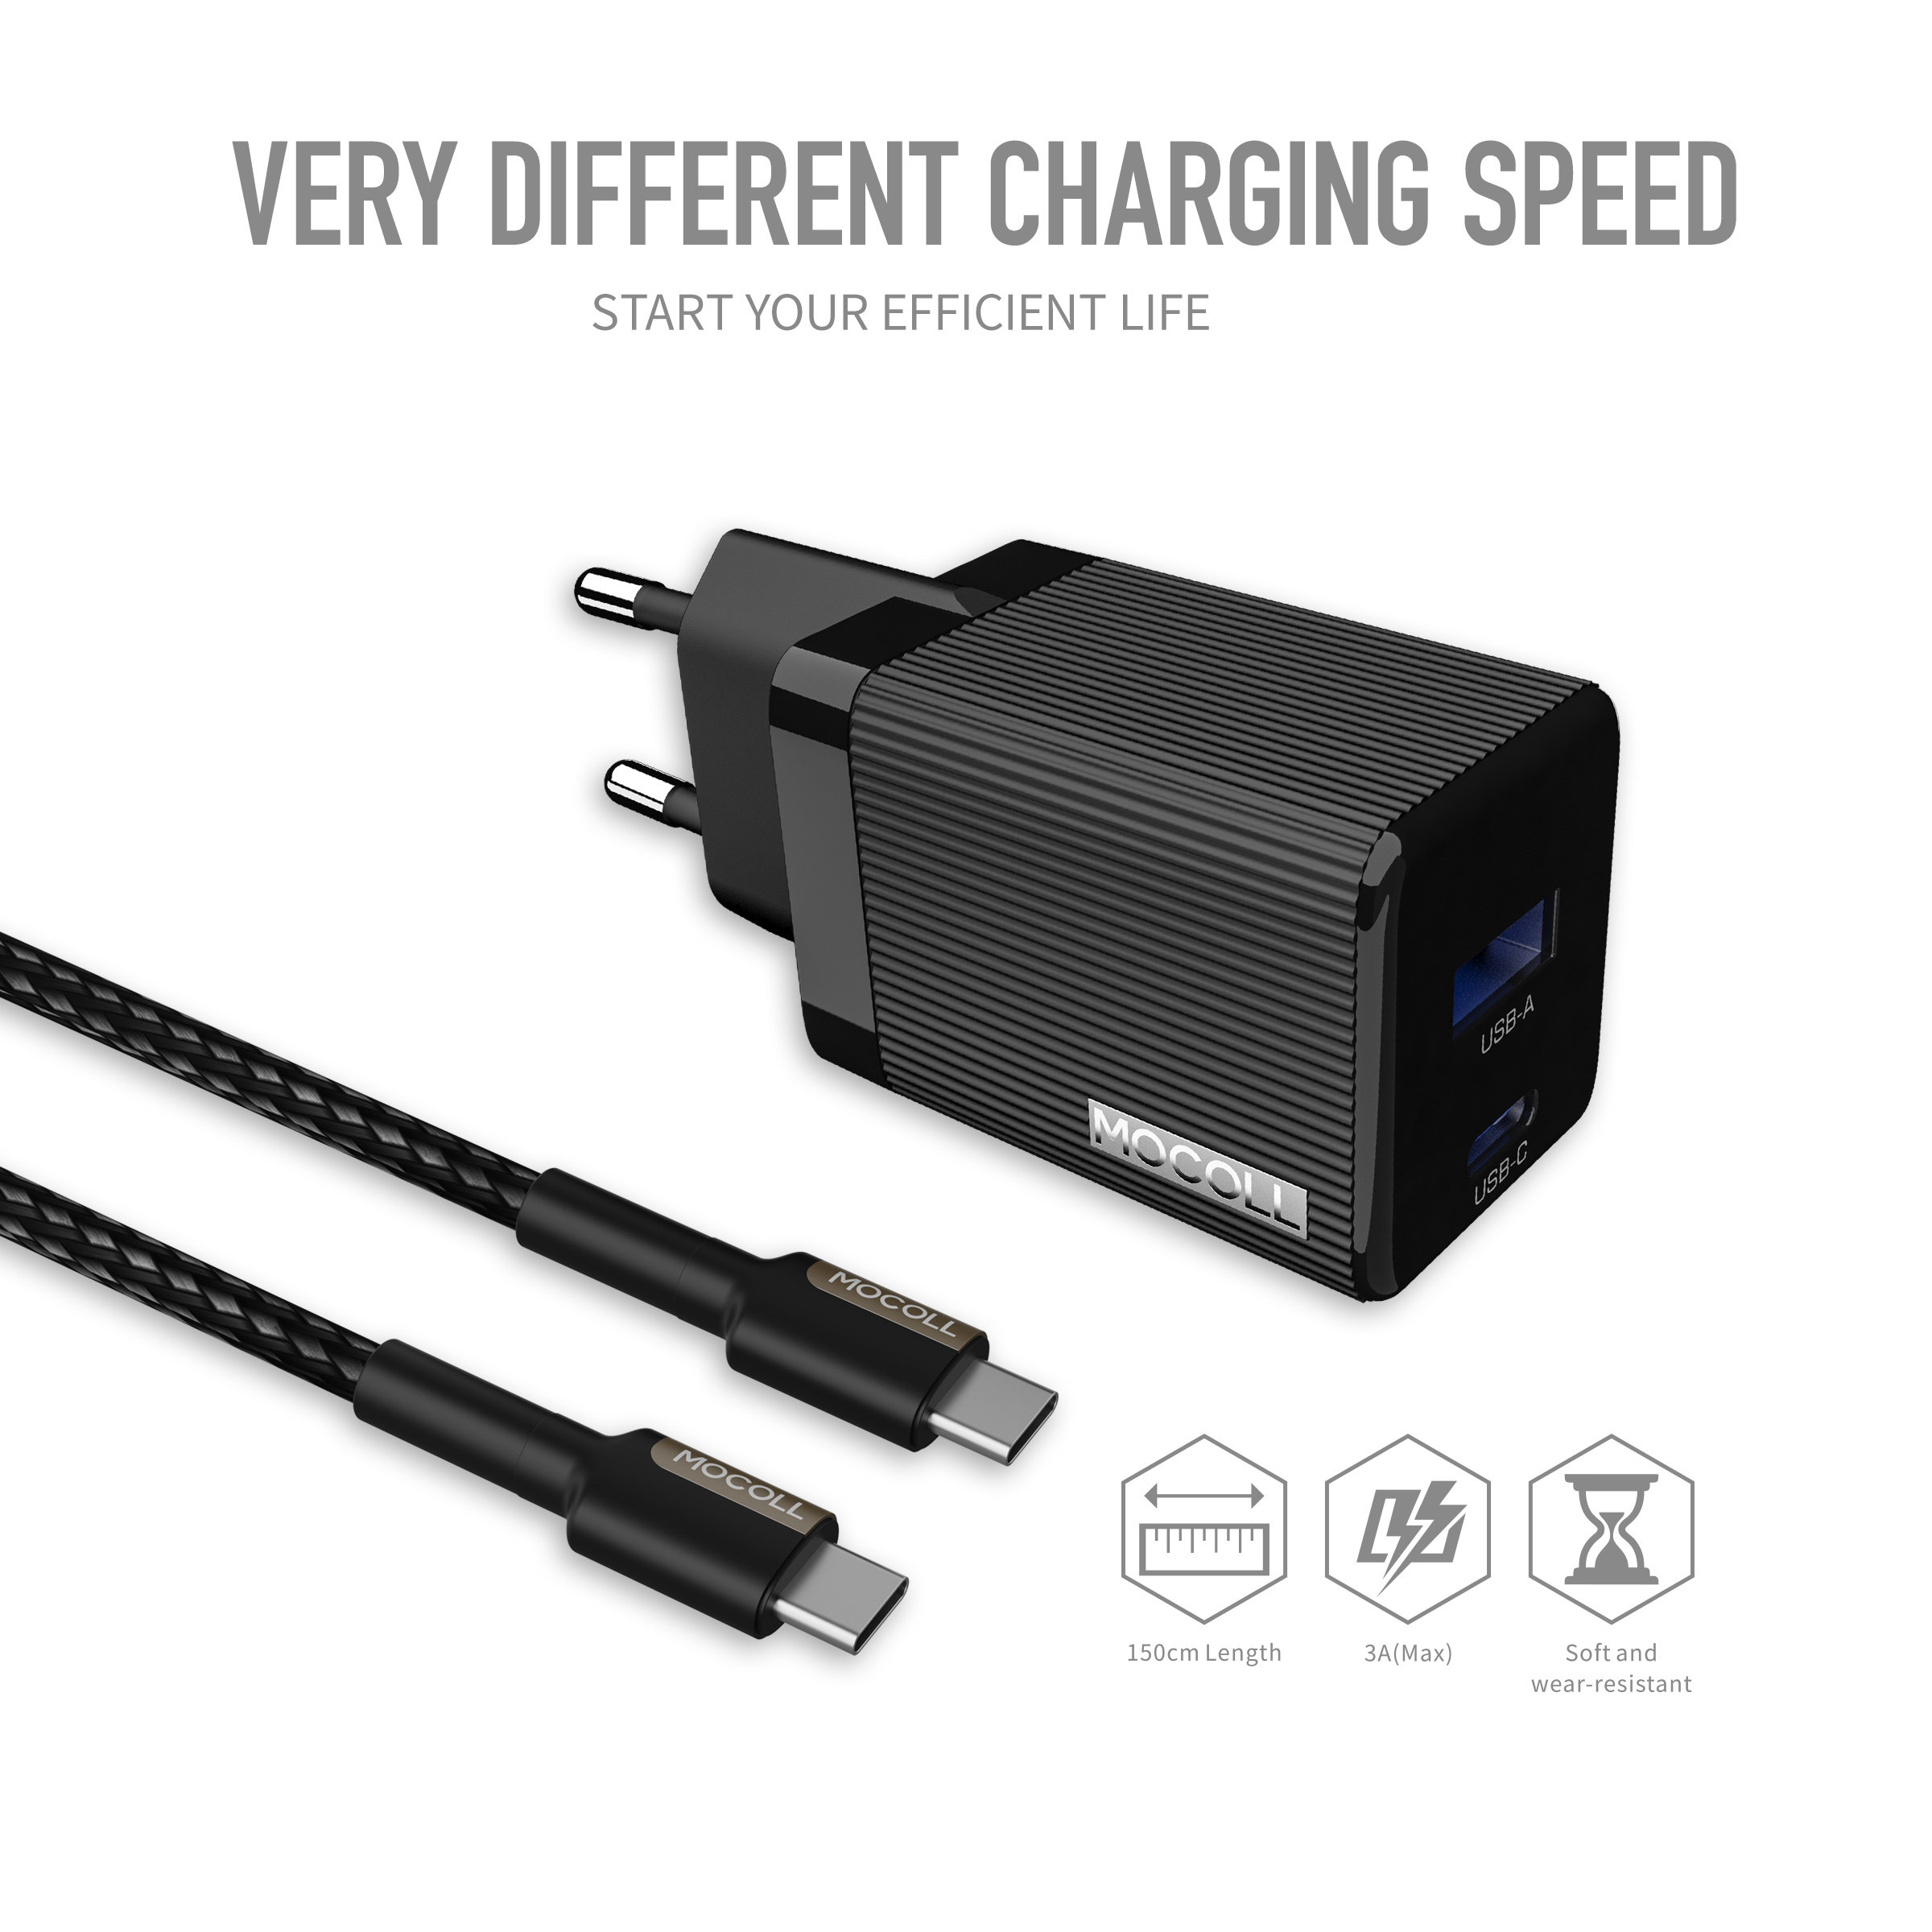 30W PD fast charger